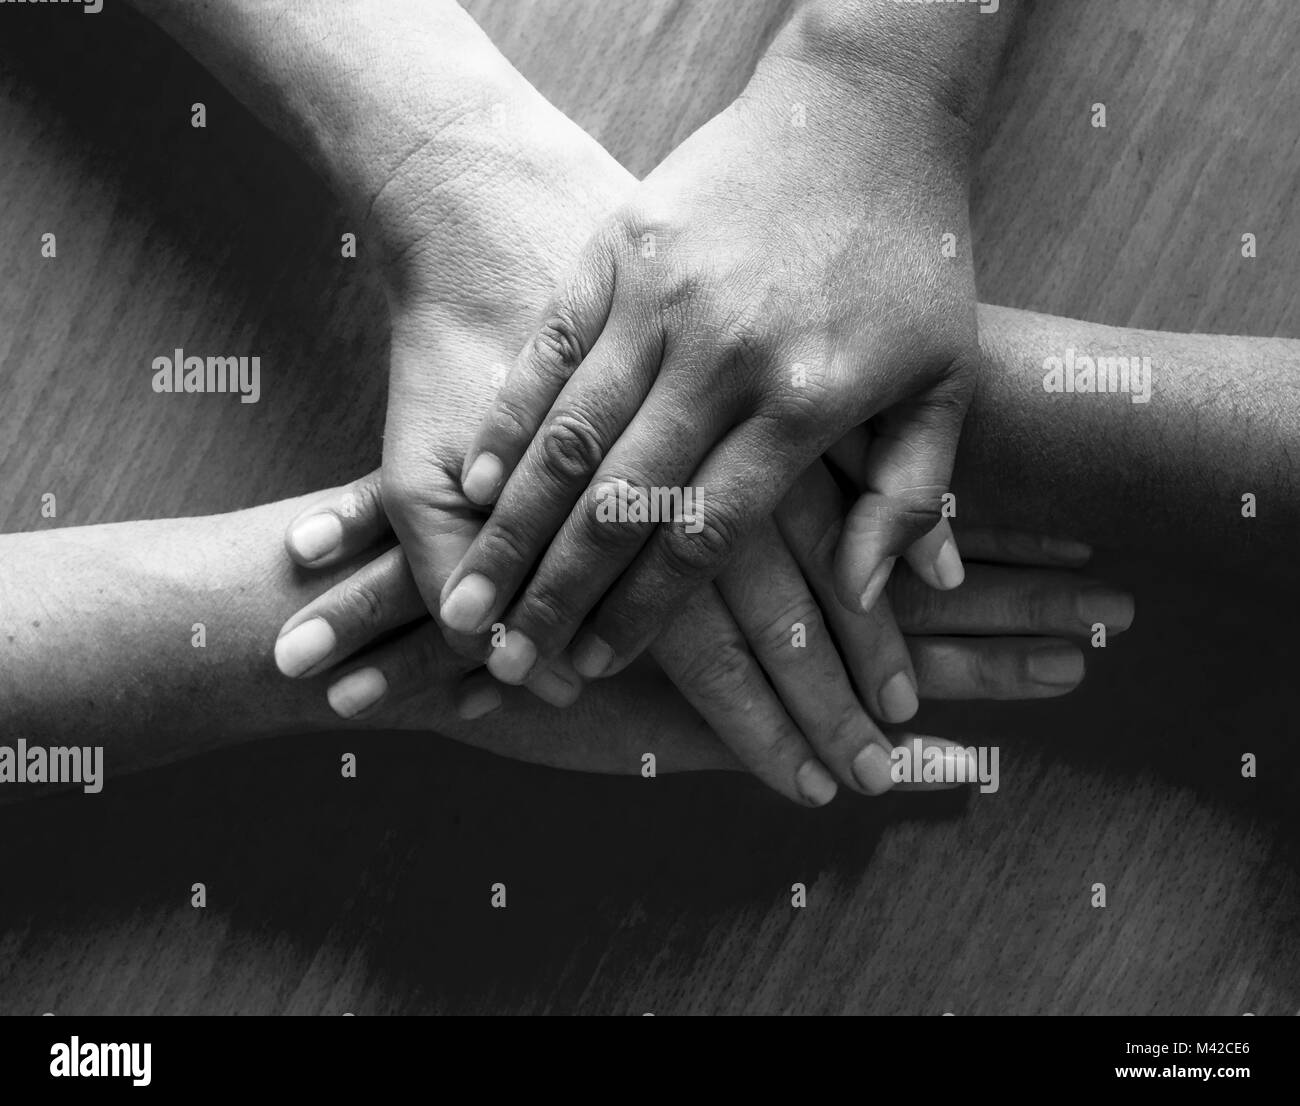 looking down on four fifty year old female hands placed ontop of each other, the top hand and third hand are Asian and the second and fourth hand are  Stock Photo